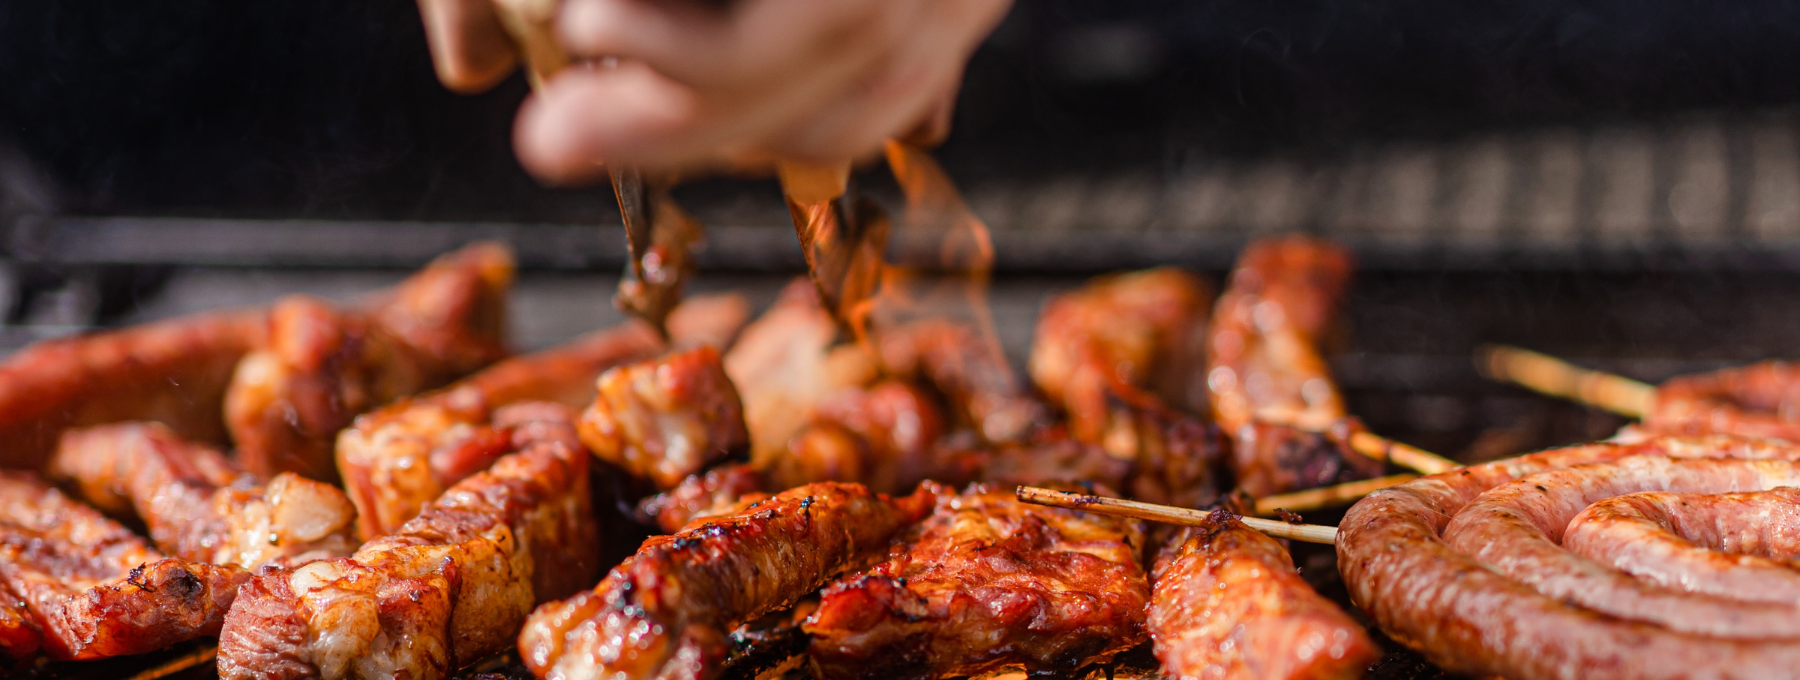 Heating Up Summer: 5 Ingredients to spice up your barbecue